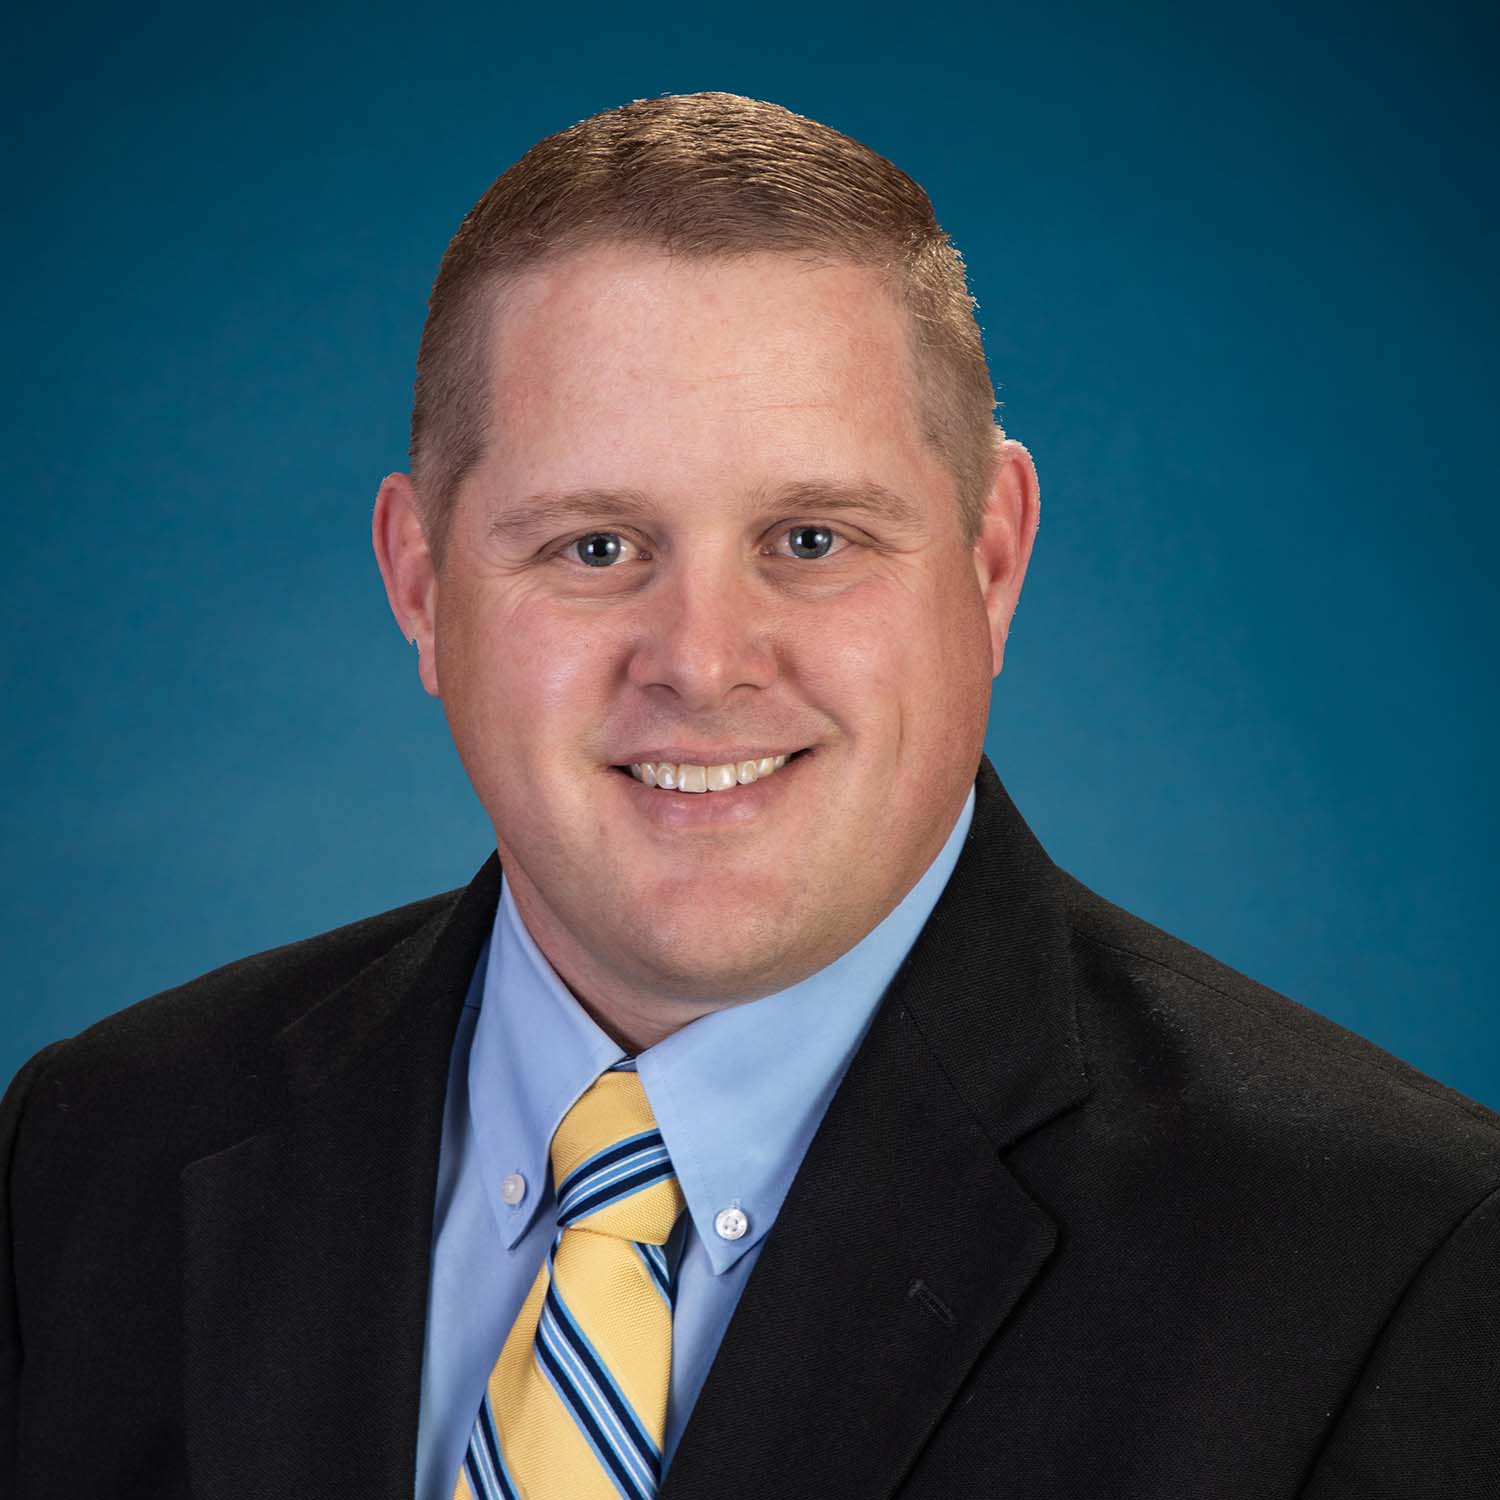 Photo of Nicholas Moody, Commercial Lender for Union State Bank's Bartelsville location.